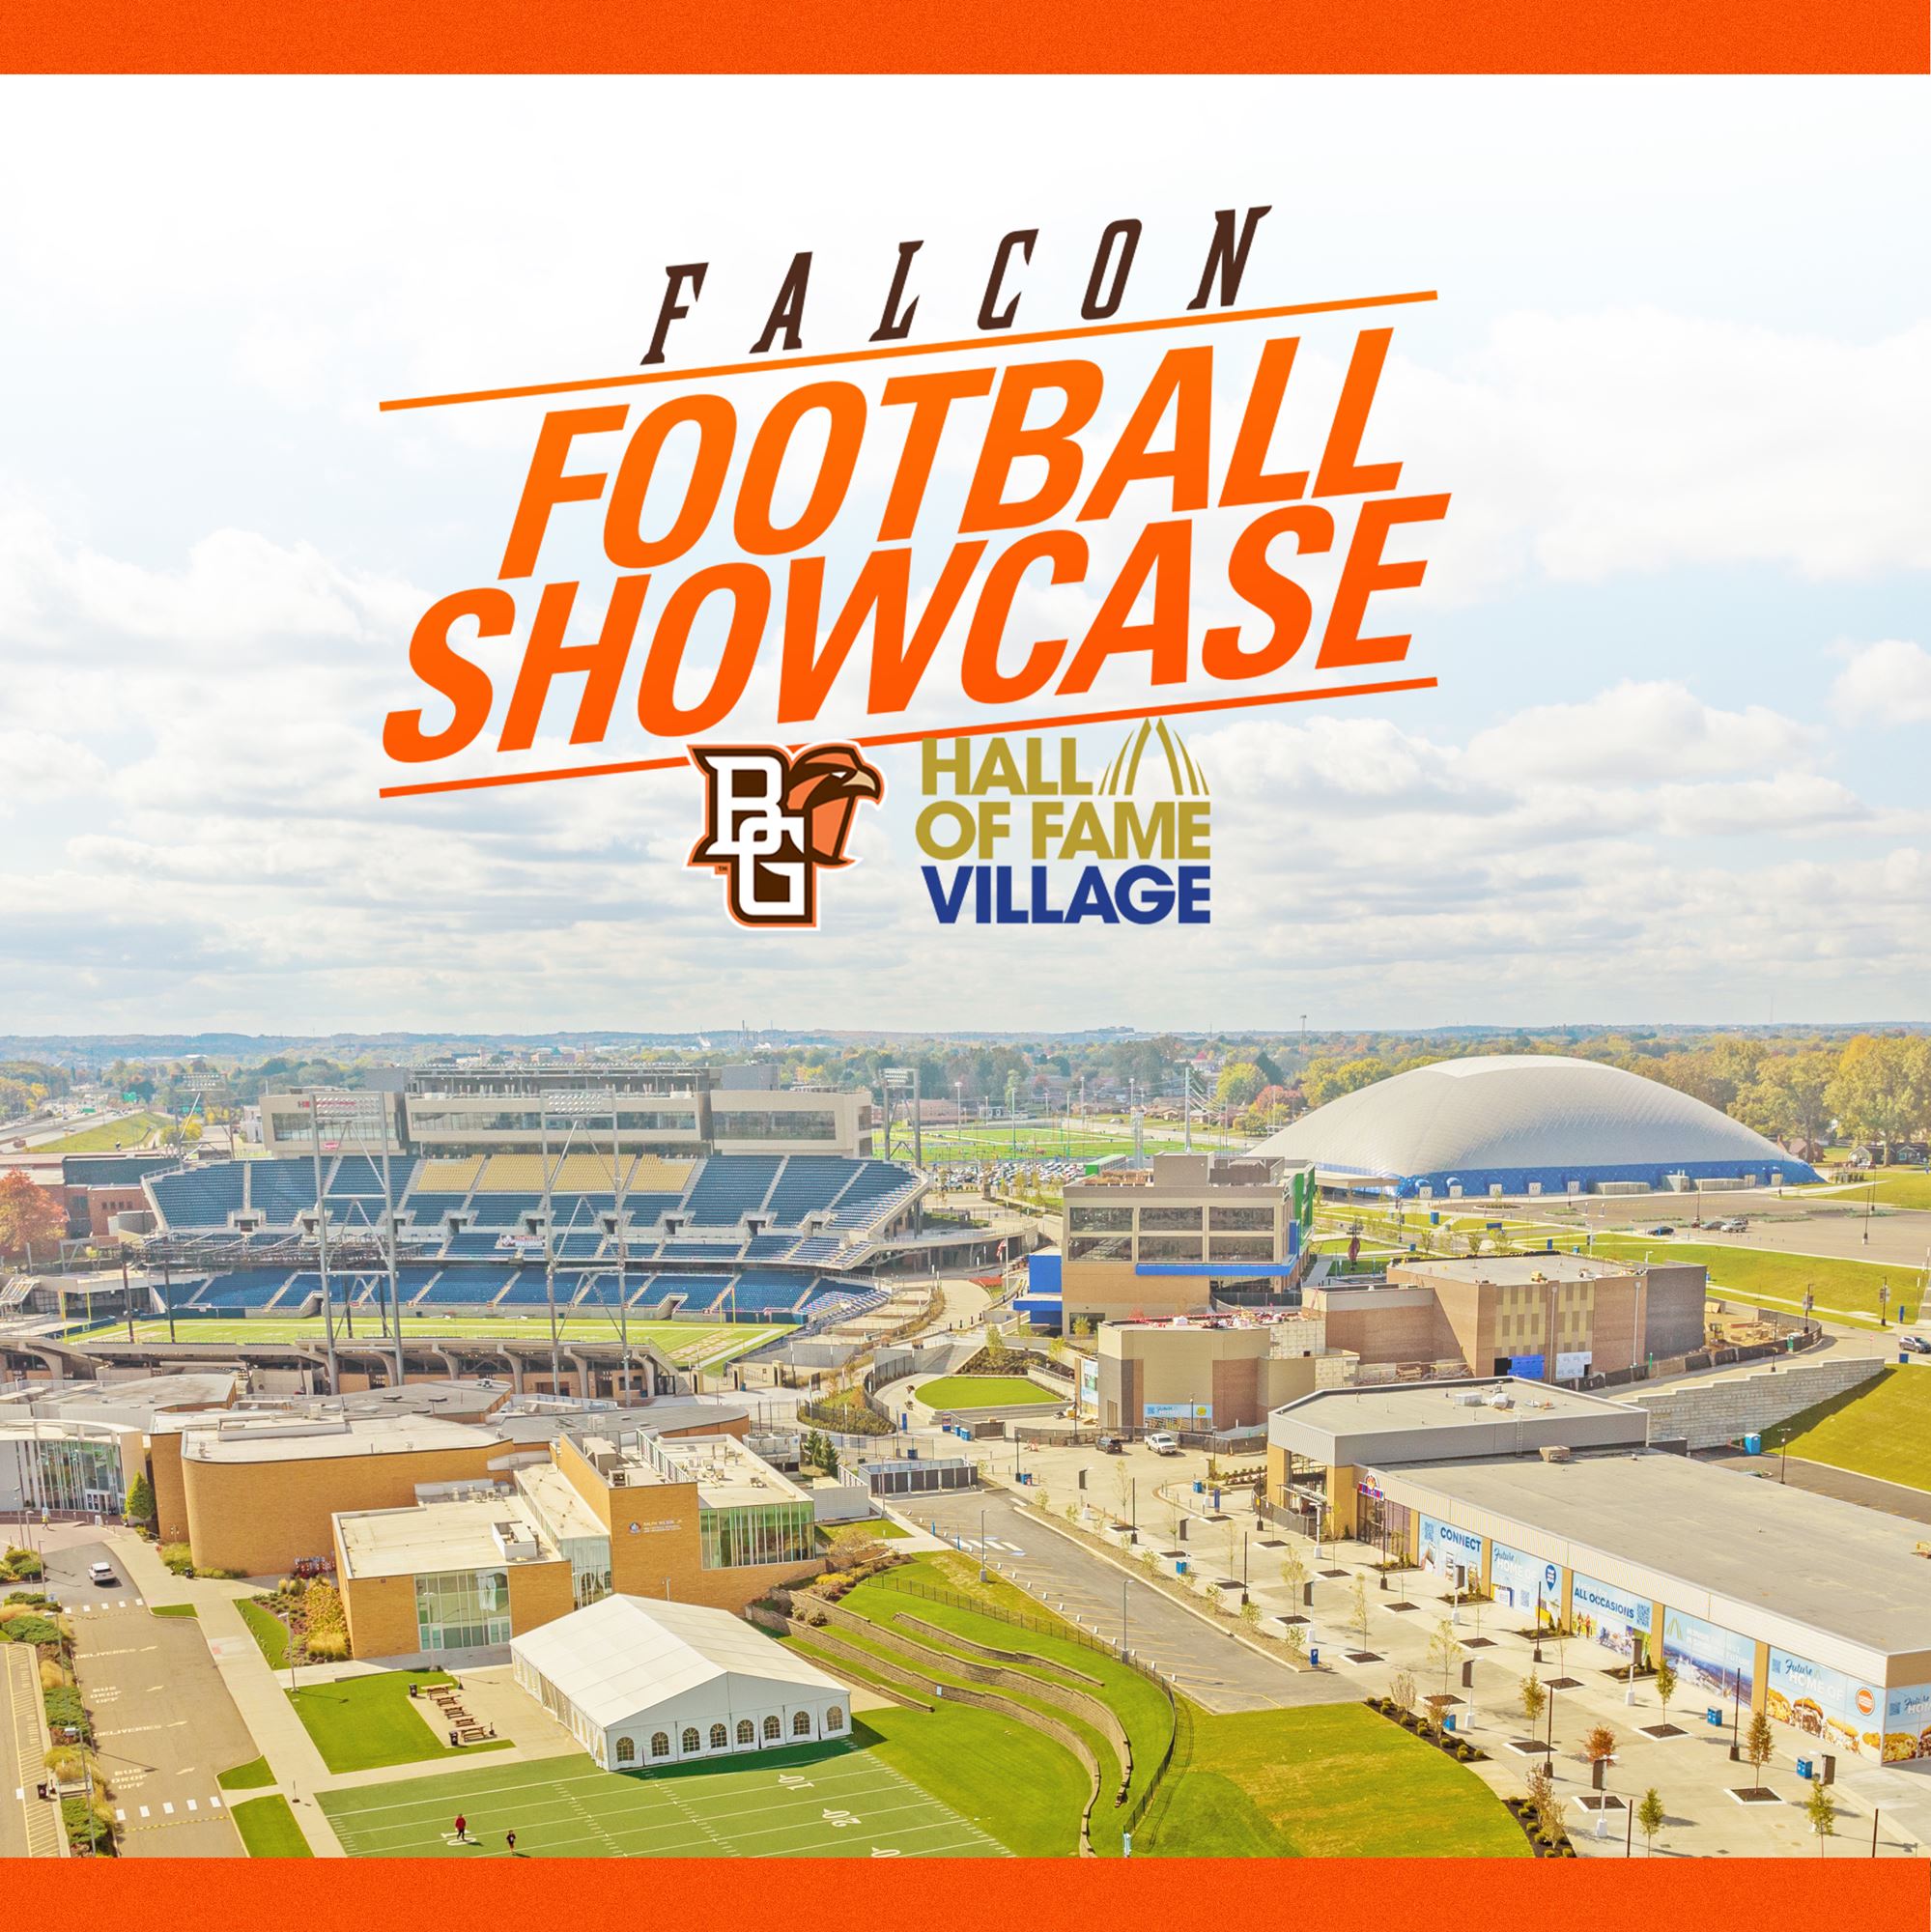 Falcons To Land At Hall Of Fame Village For Falcon Football Showcase On August 17